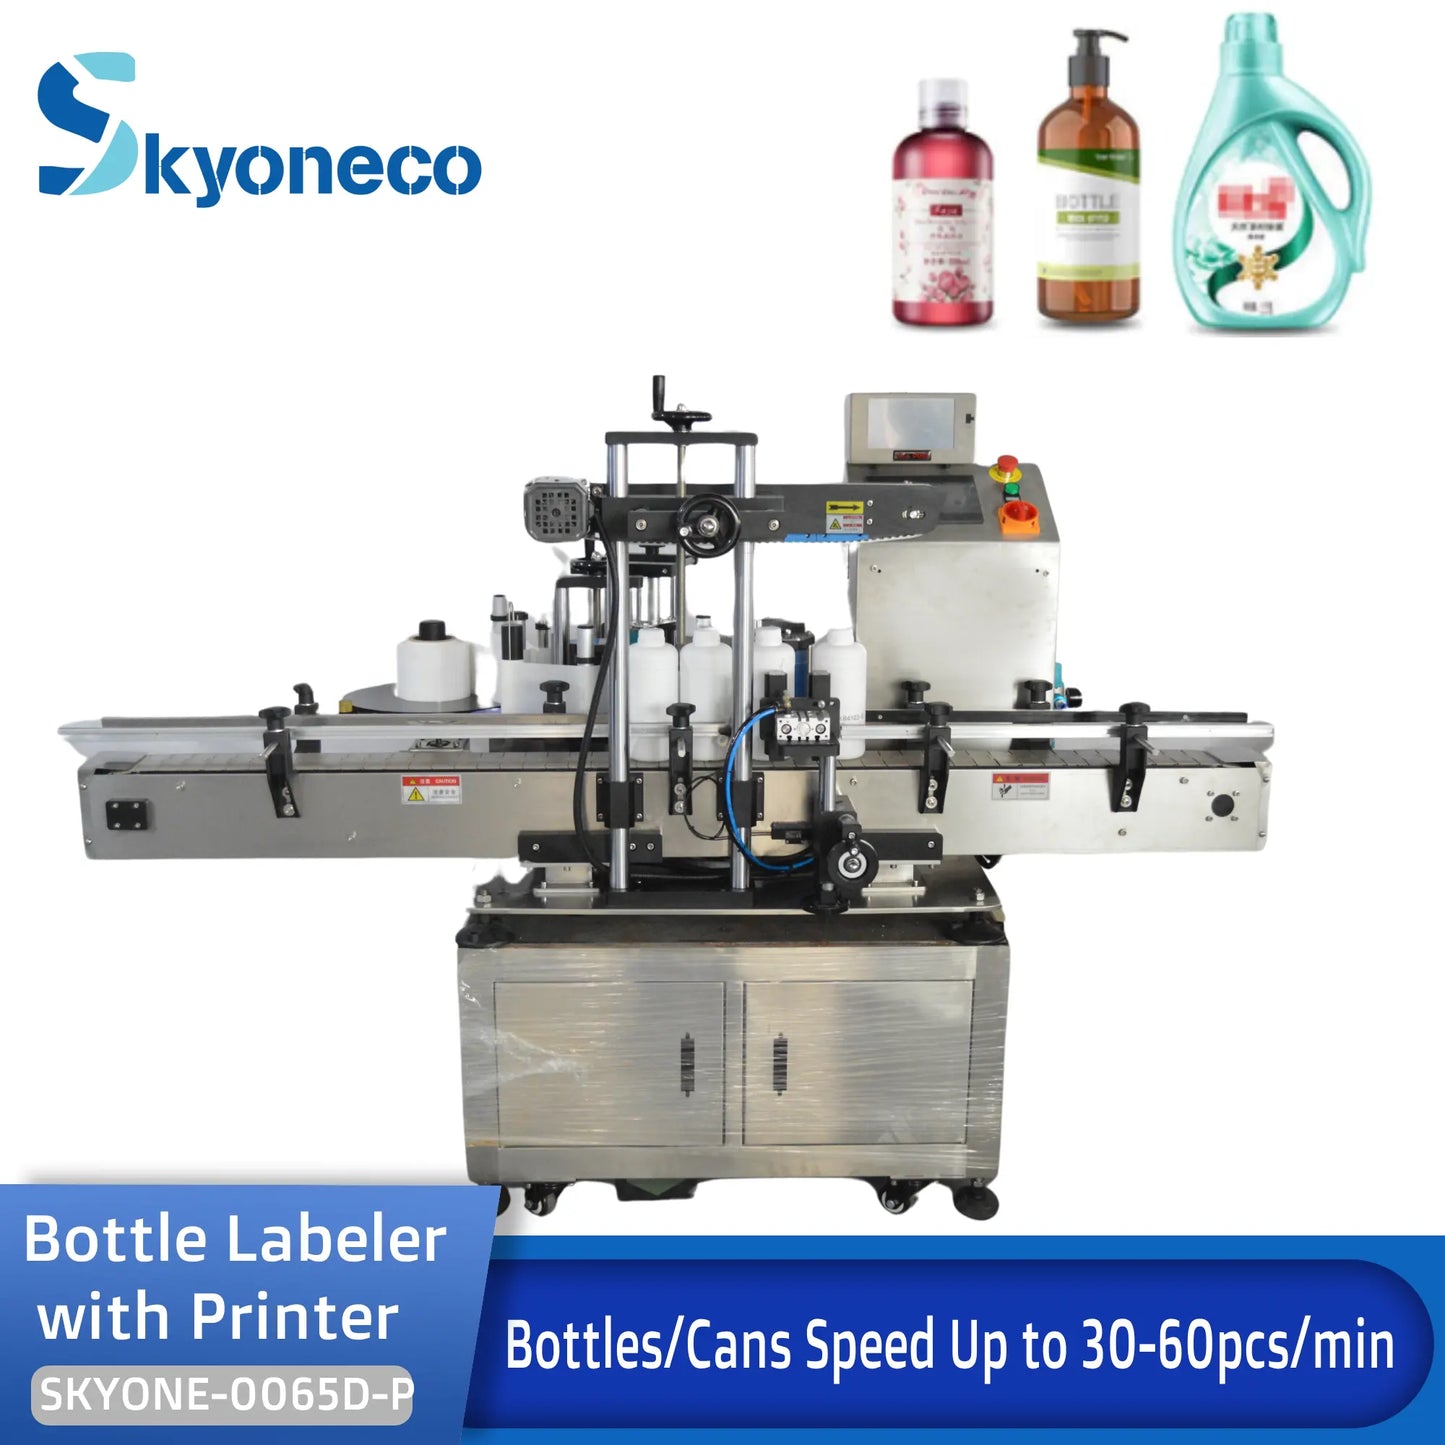 SKYONE-0065D-P Automatic Bottle Position Labeling Machine with Printer